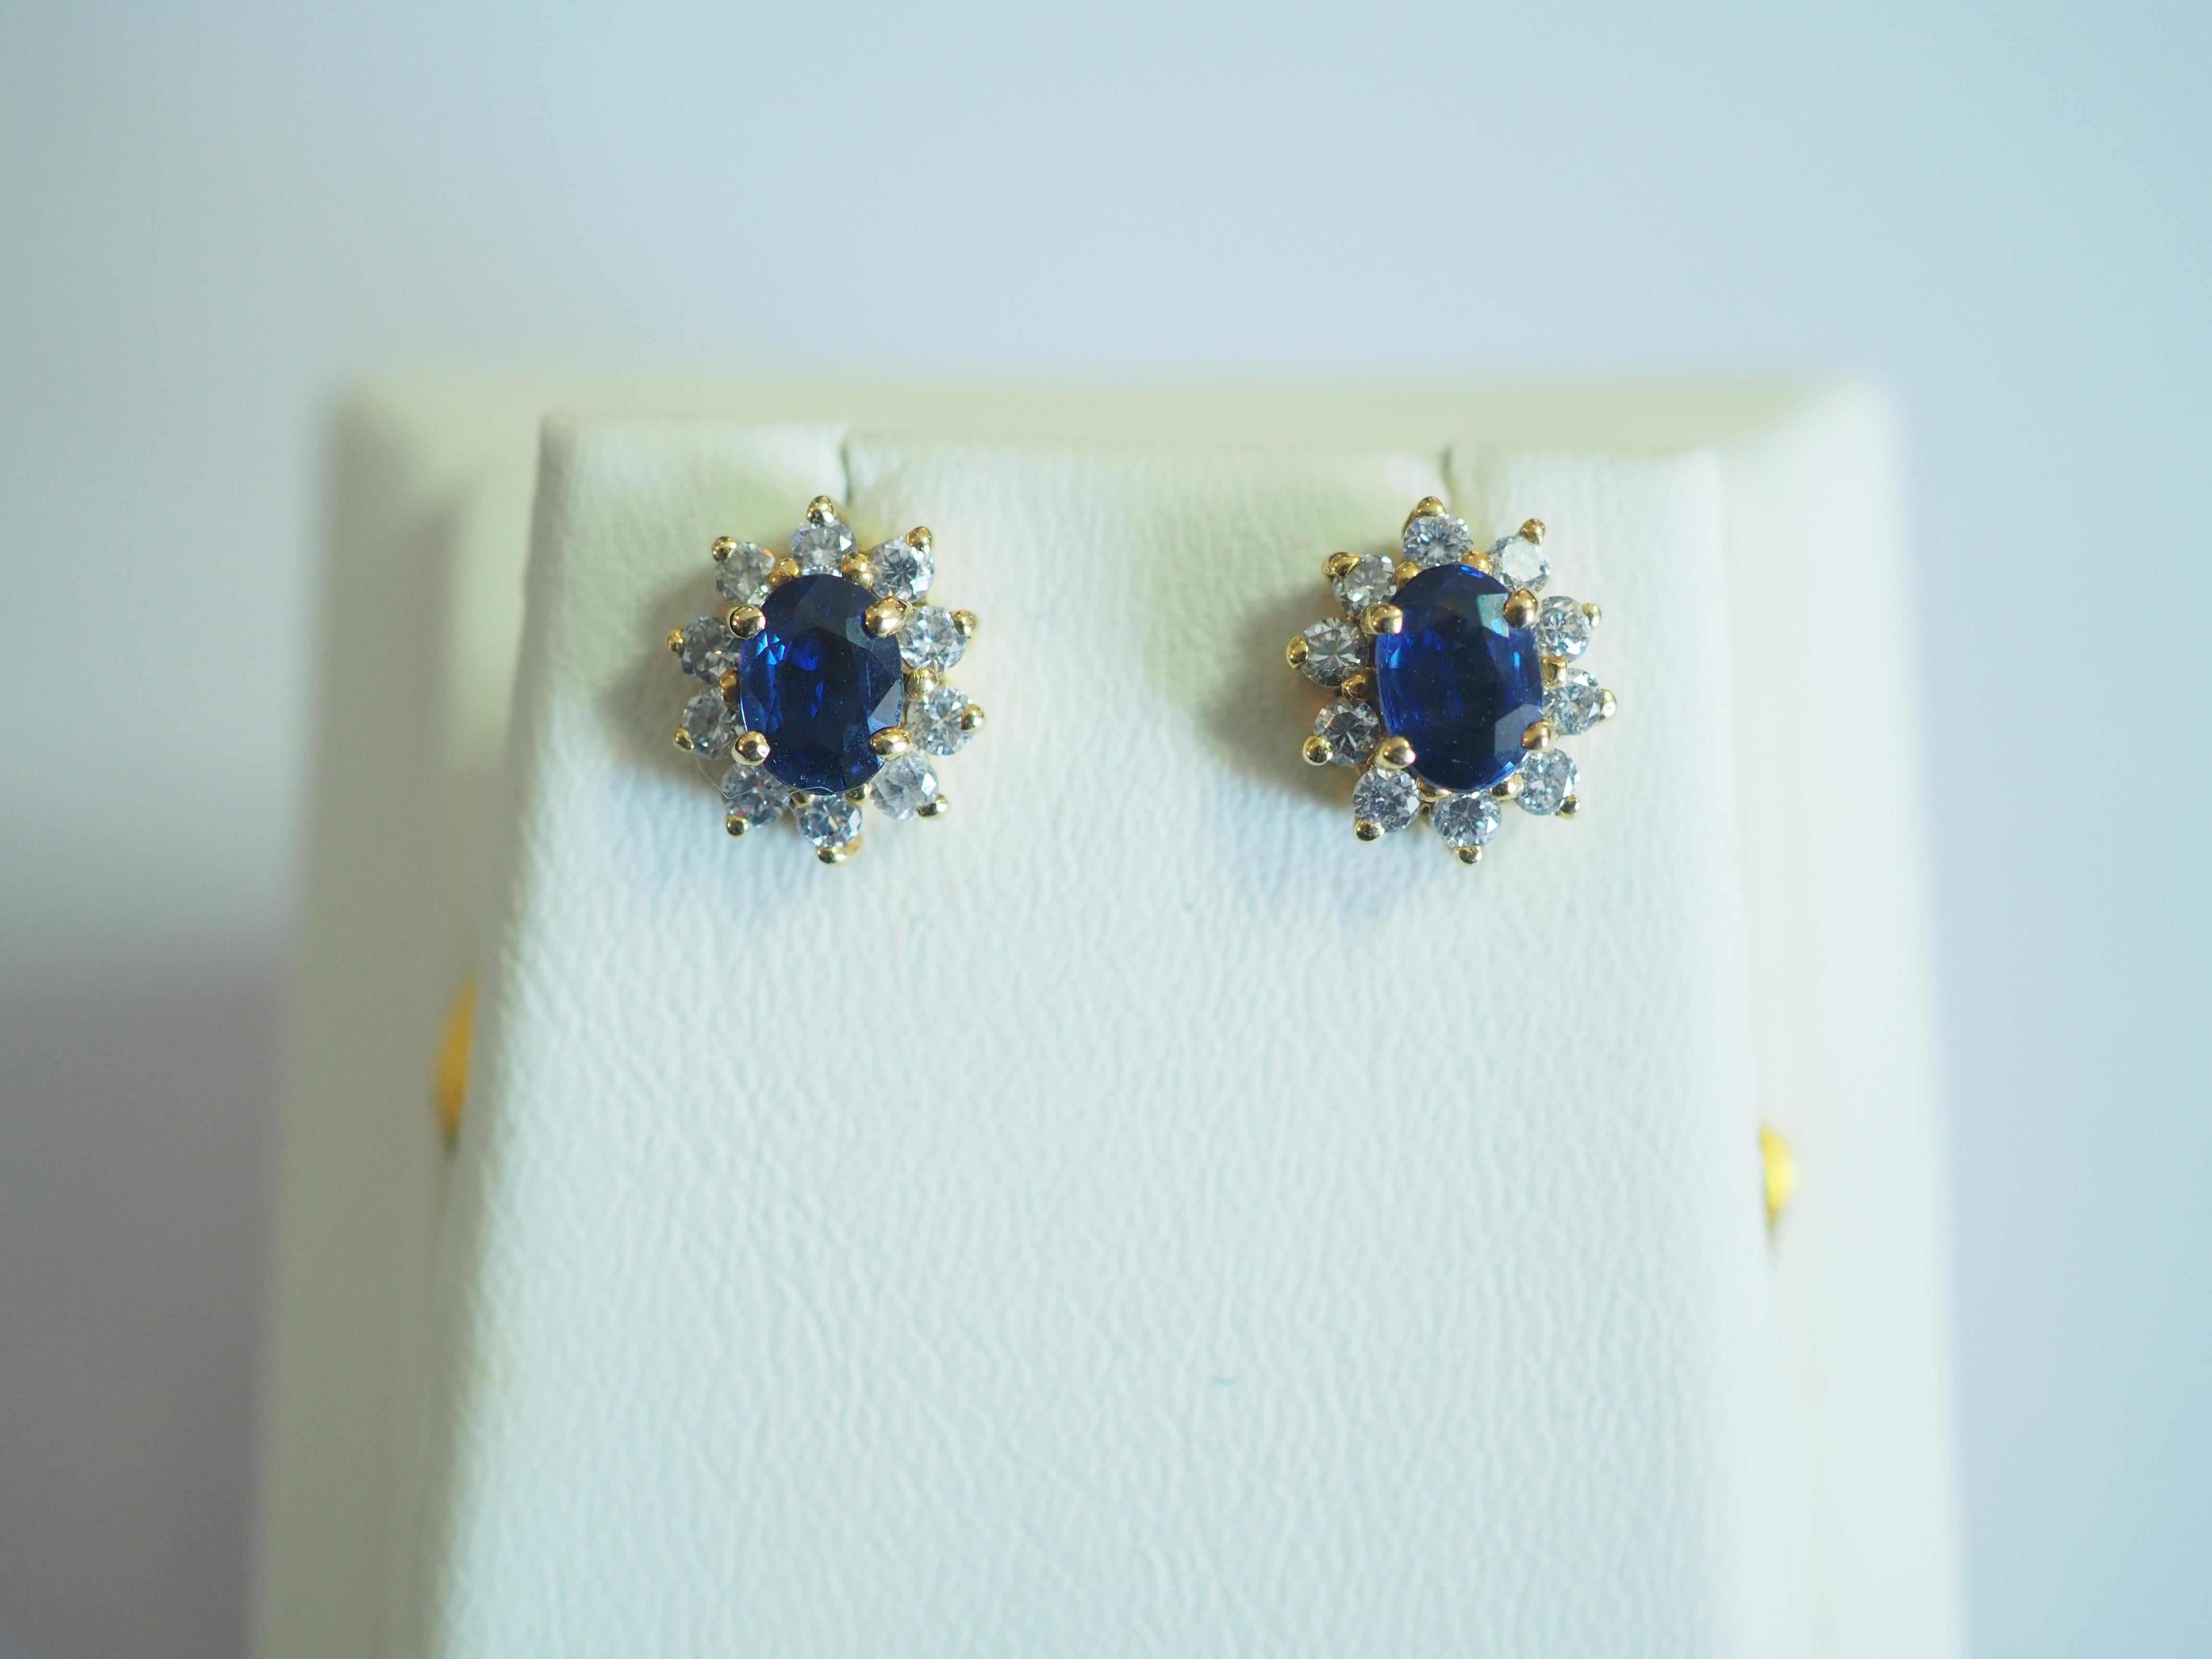 Estate jewelry for auction as is starting at $1. No reserve auction- sold as is!

Presented here is a fine gorgeous blue sapphire and diamond cocktail stud earrings. The oval blue sapphires have very nice blue tone and saturation with a lot of fire.